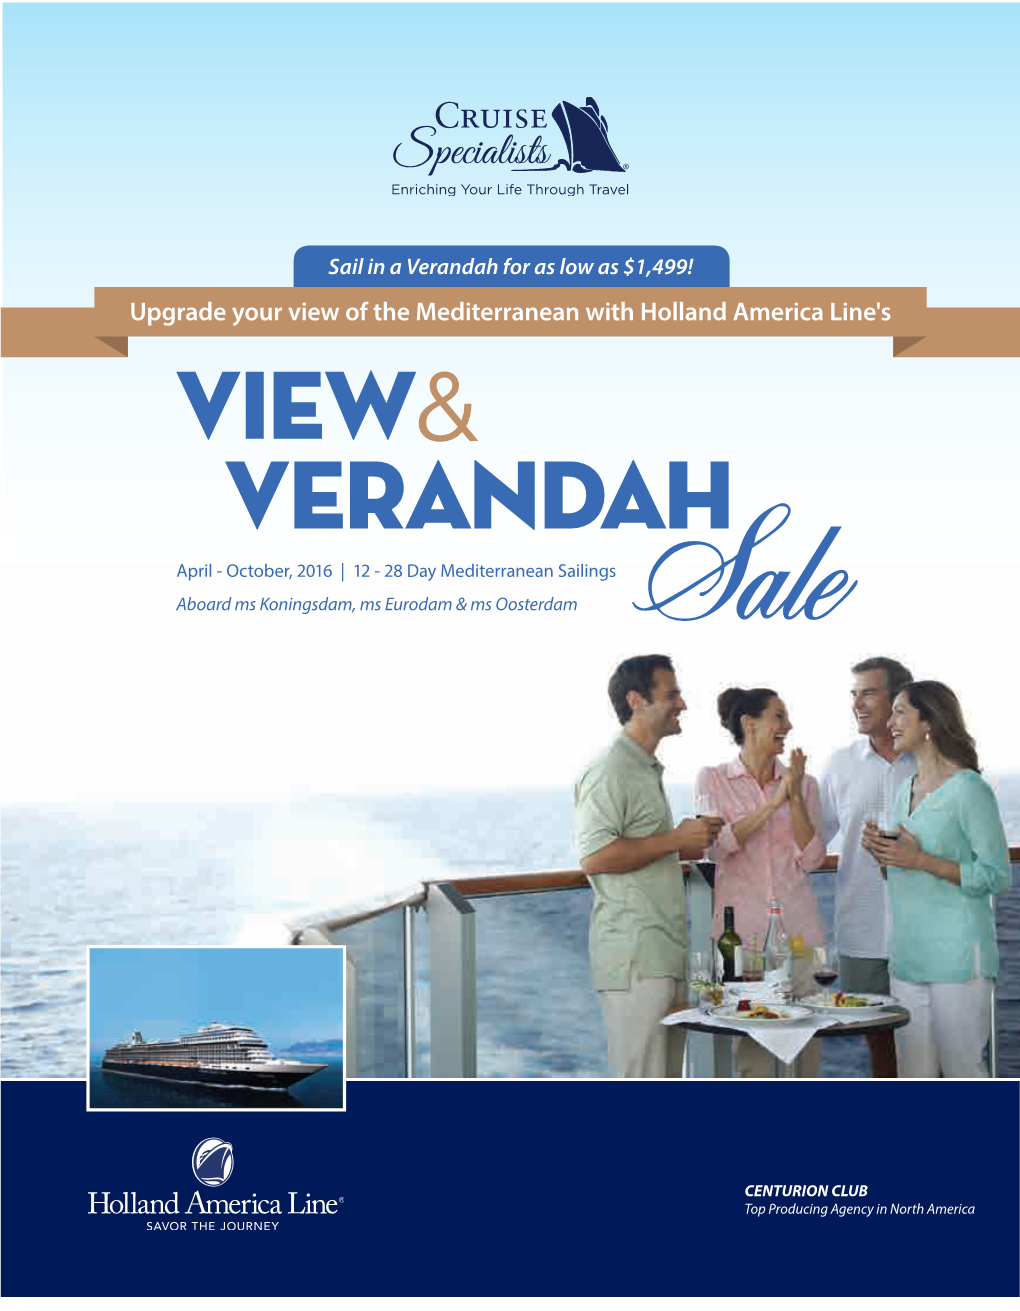 Upgrade Your View of the Mediterranean with Holland America Line's